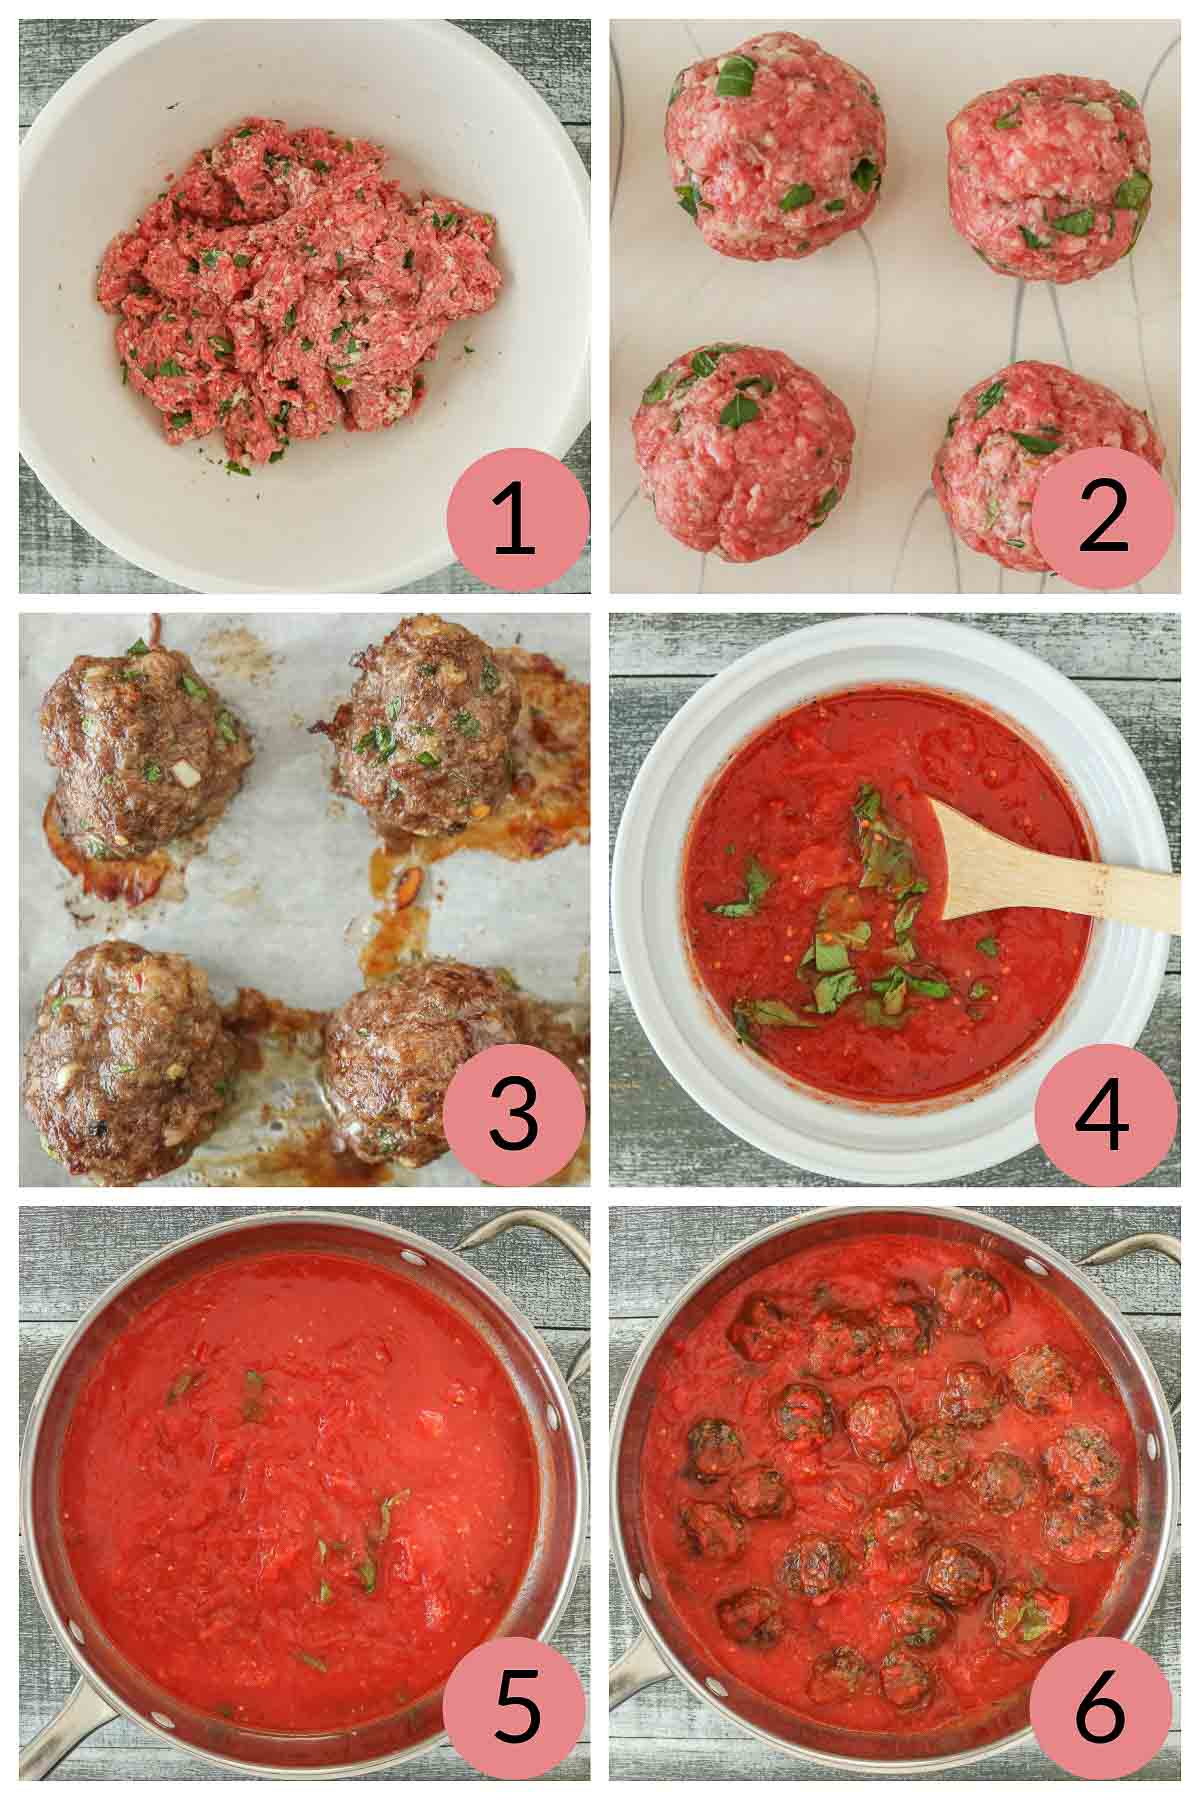 Collage of steps to make homemade meatballs and tomato sauce.